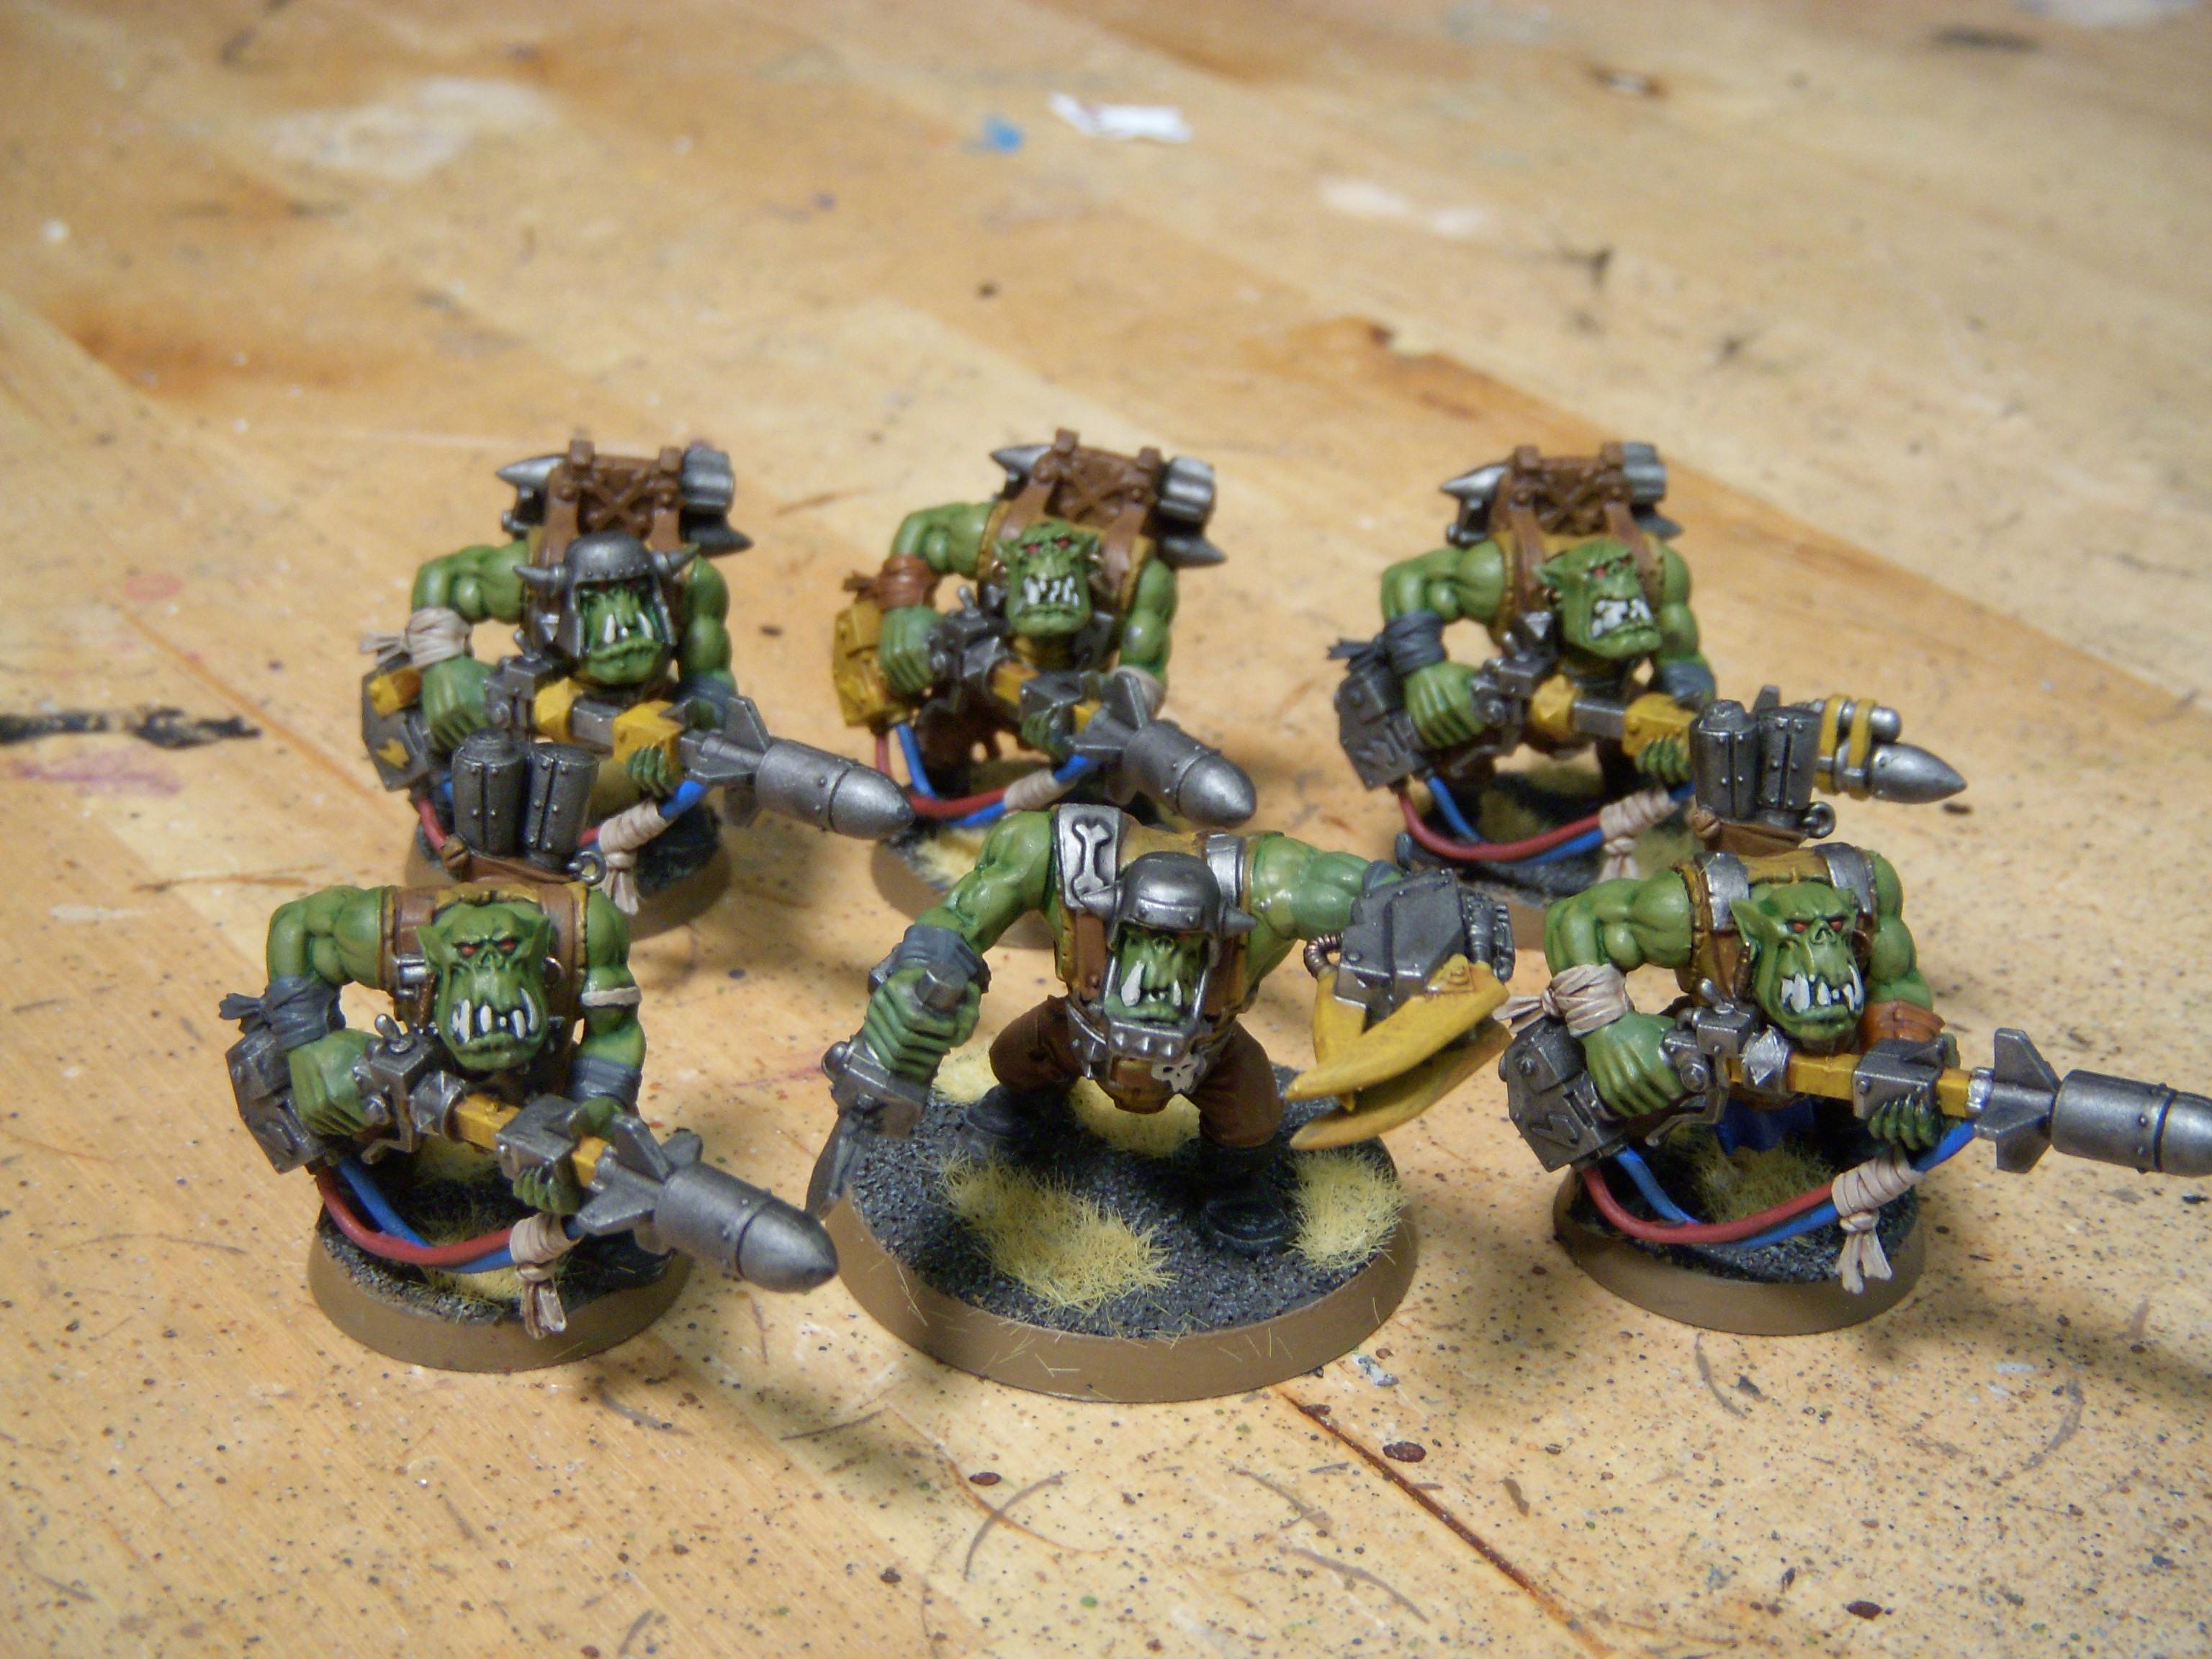 Bad Moon Orks, Imperial Guard Mordian Iron Guard Bad Moon Orks, Mordian Imperial Guard